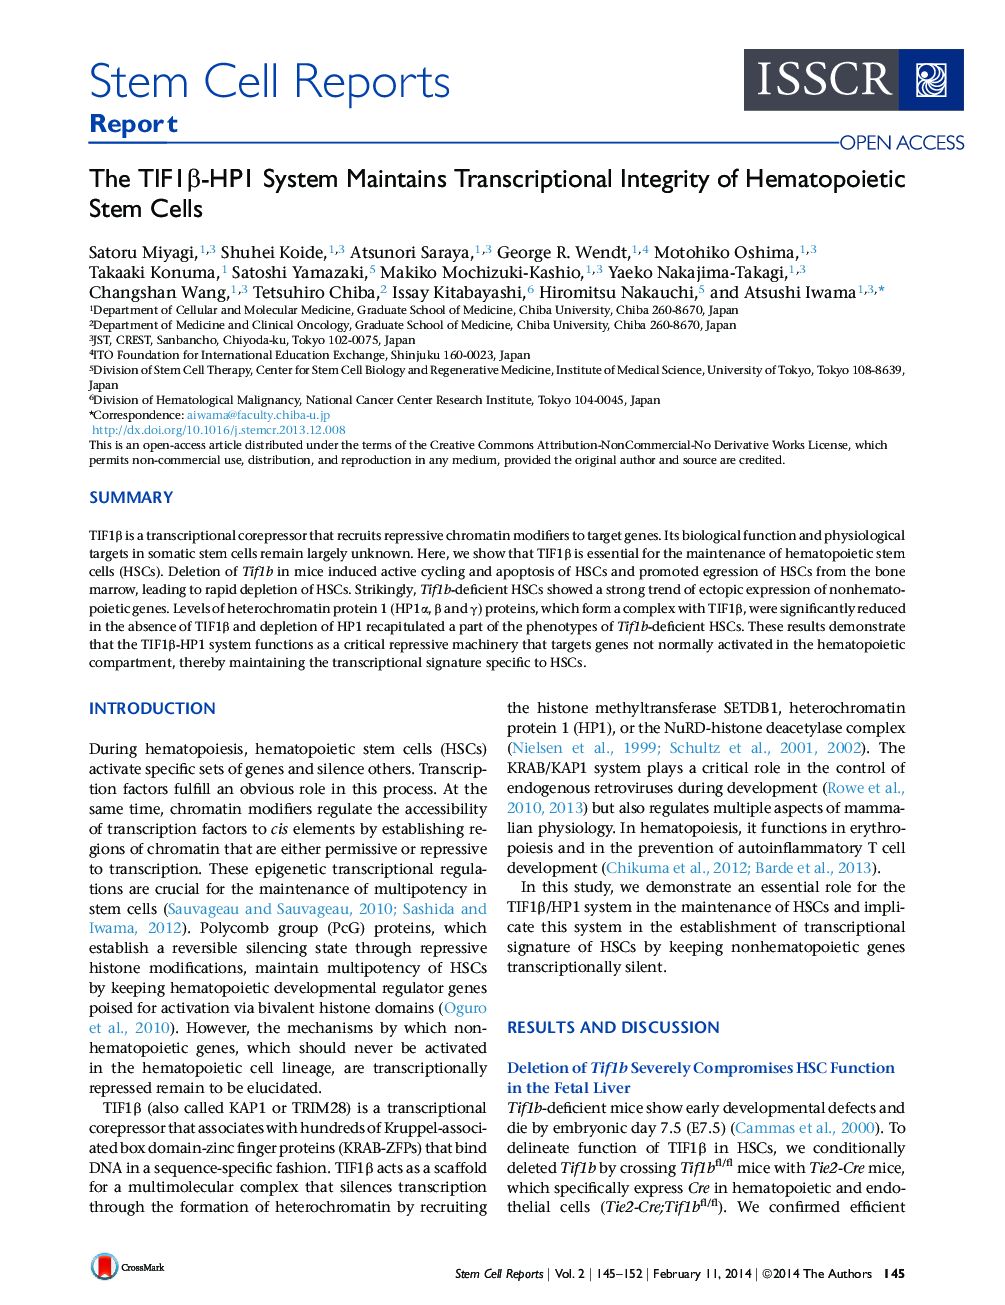 The TIF1β-HP1 System Maintains Transcriptional Integrity of Hematopoietic Stem Cells 